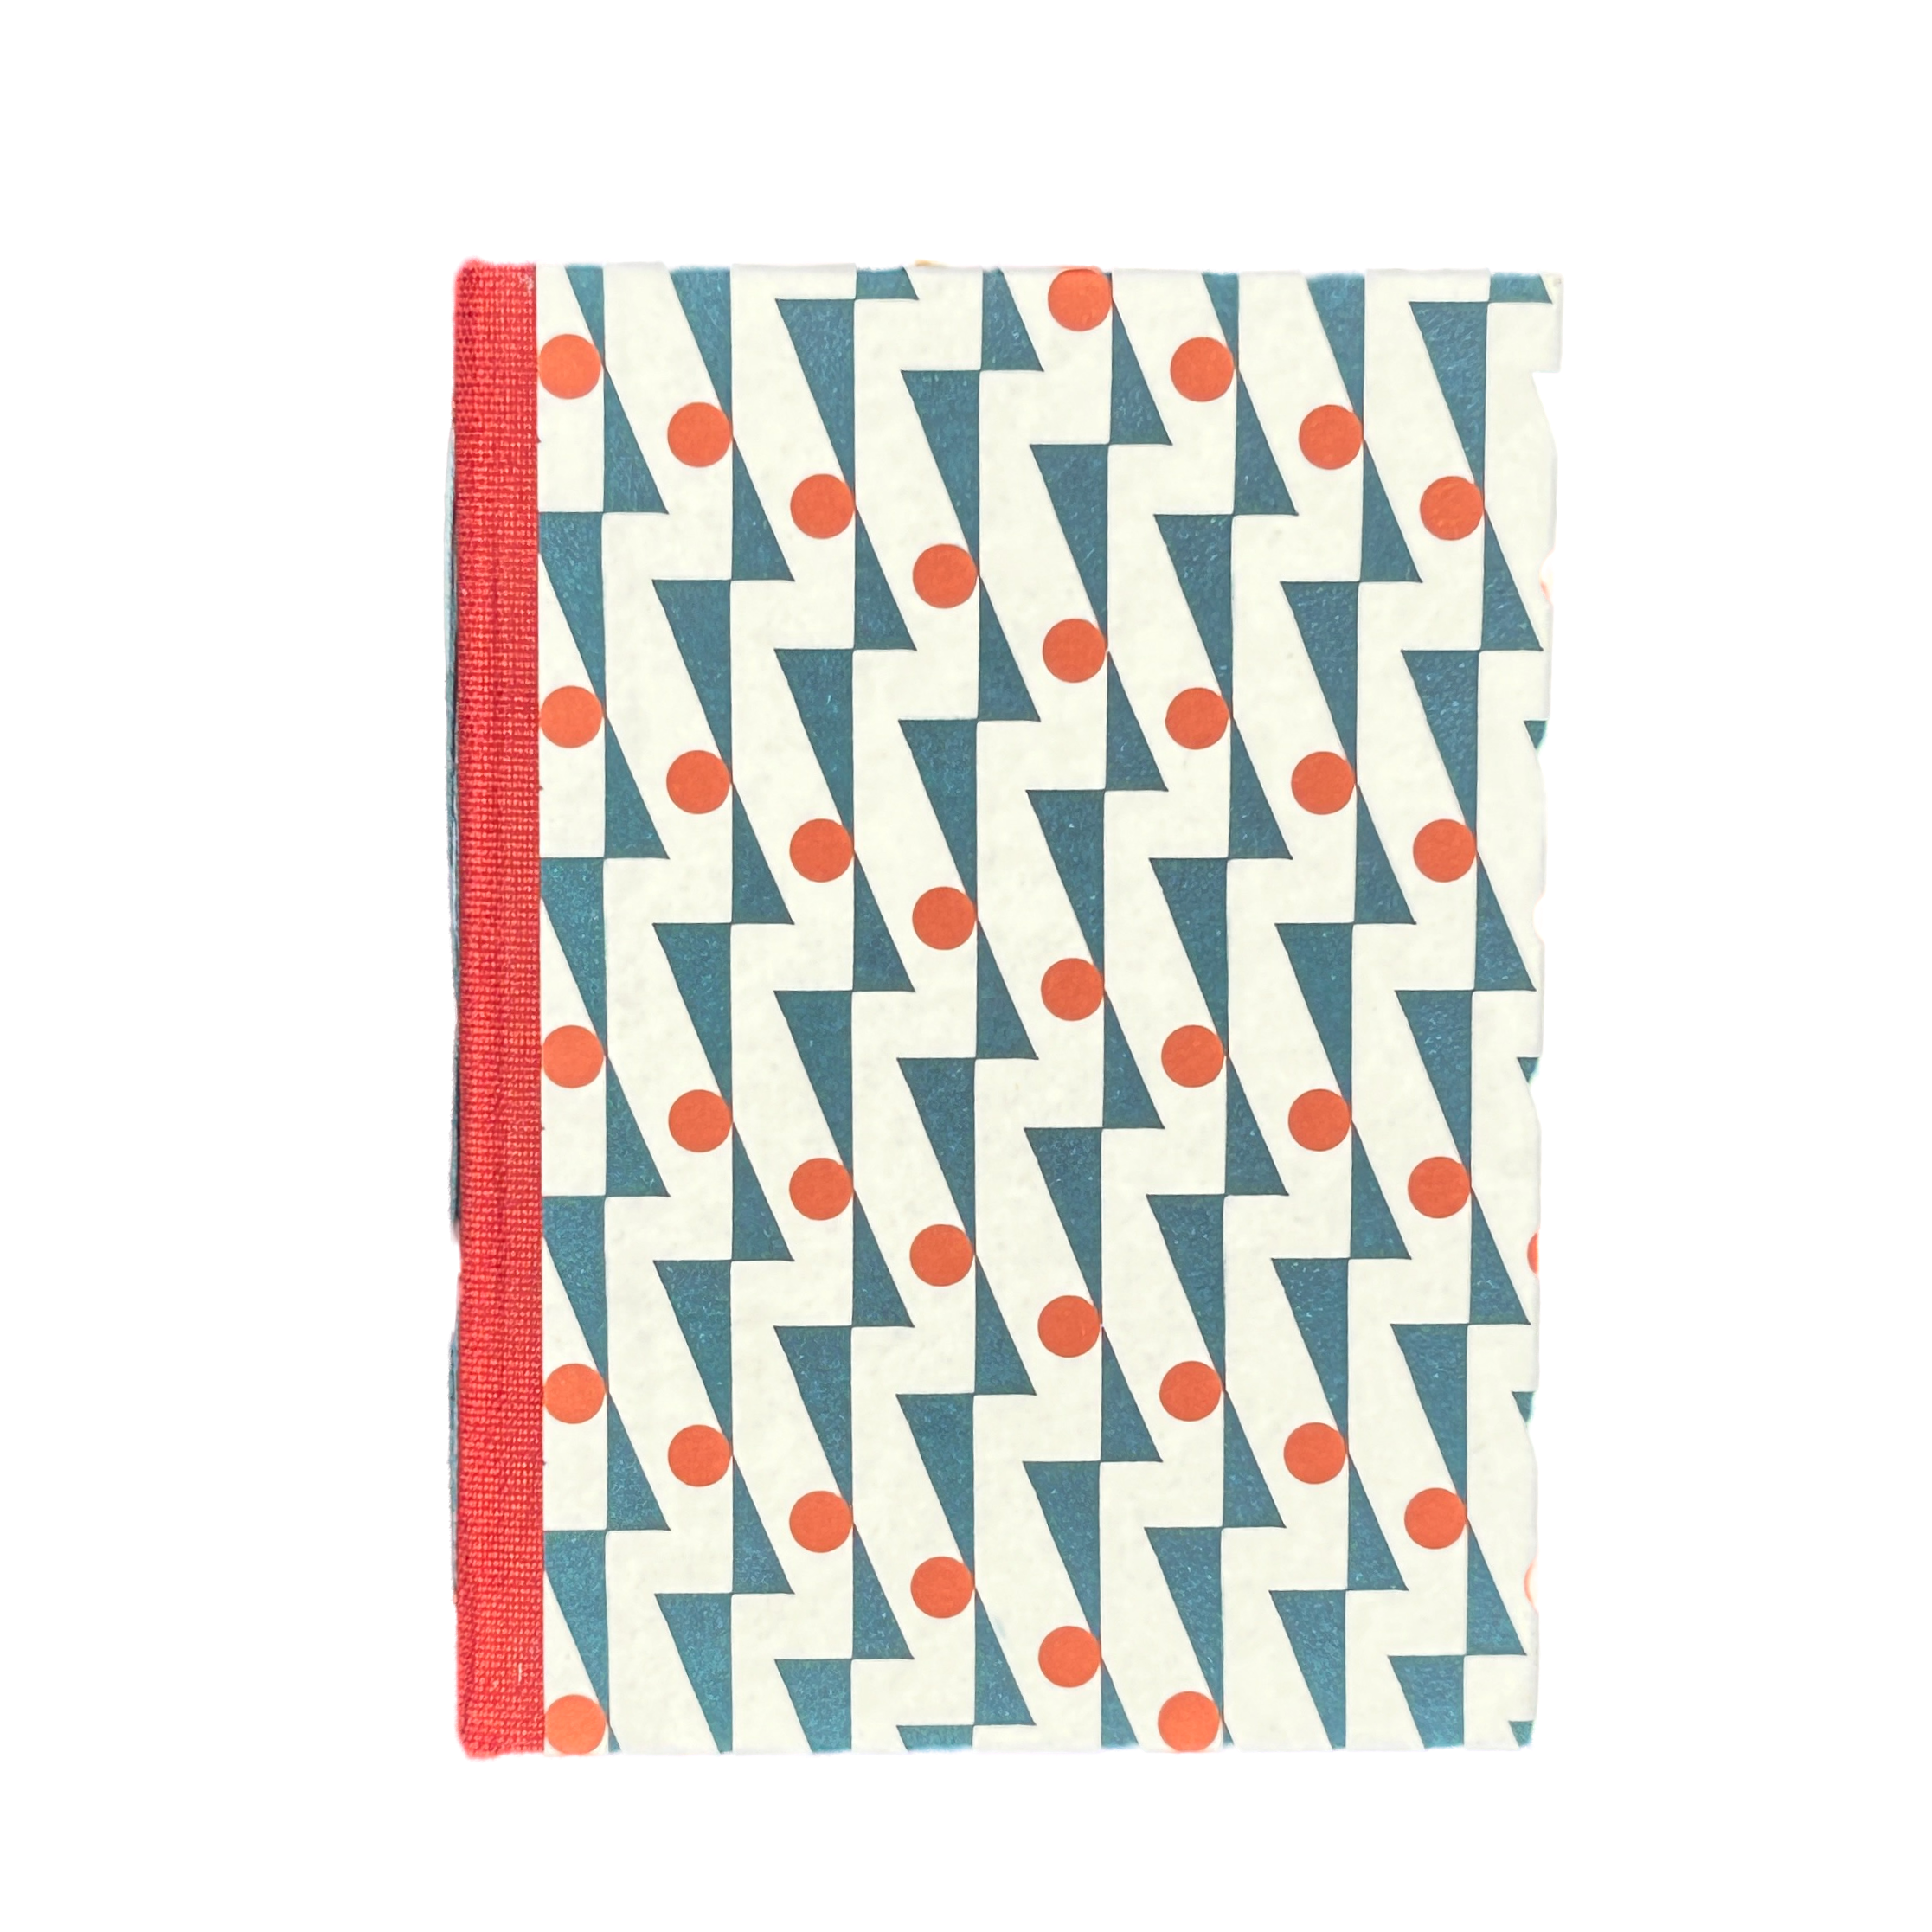 Hand Sewn Decorative Paper Hard Cover Journal